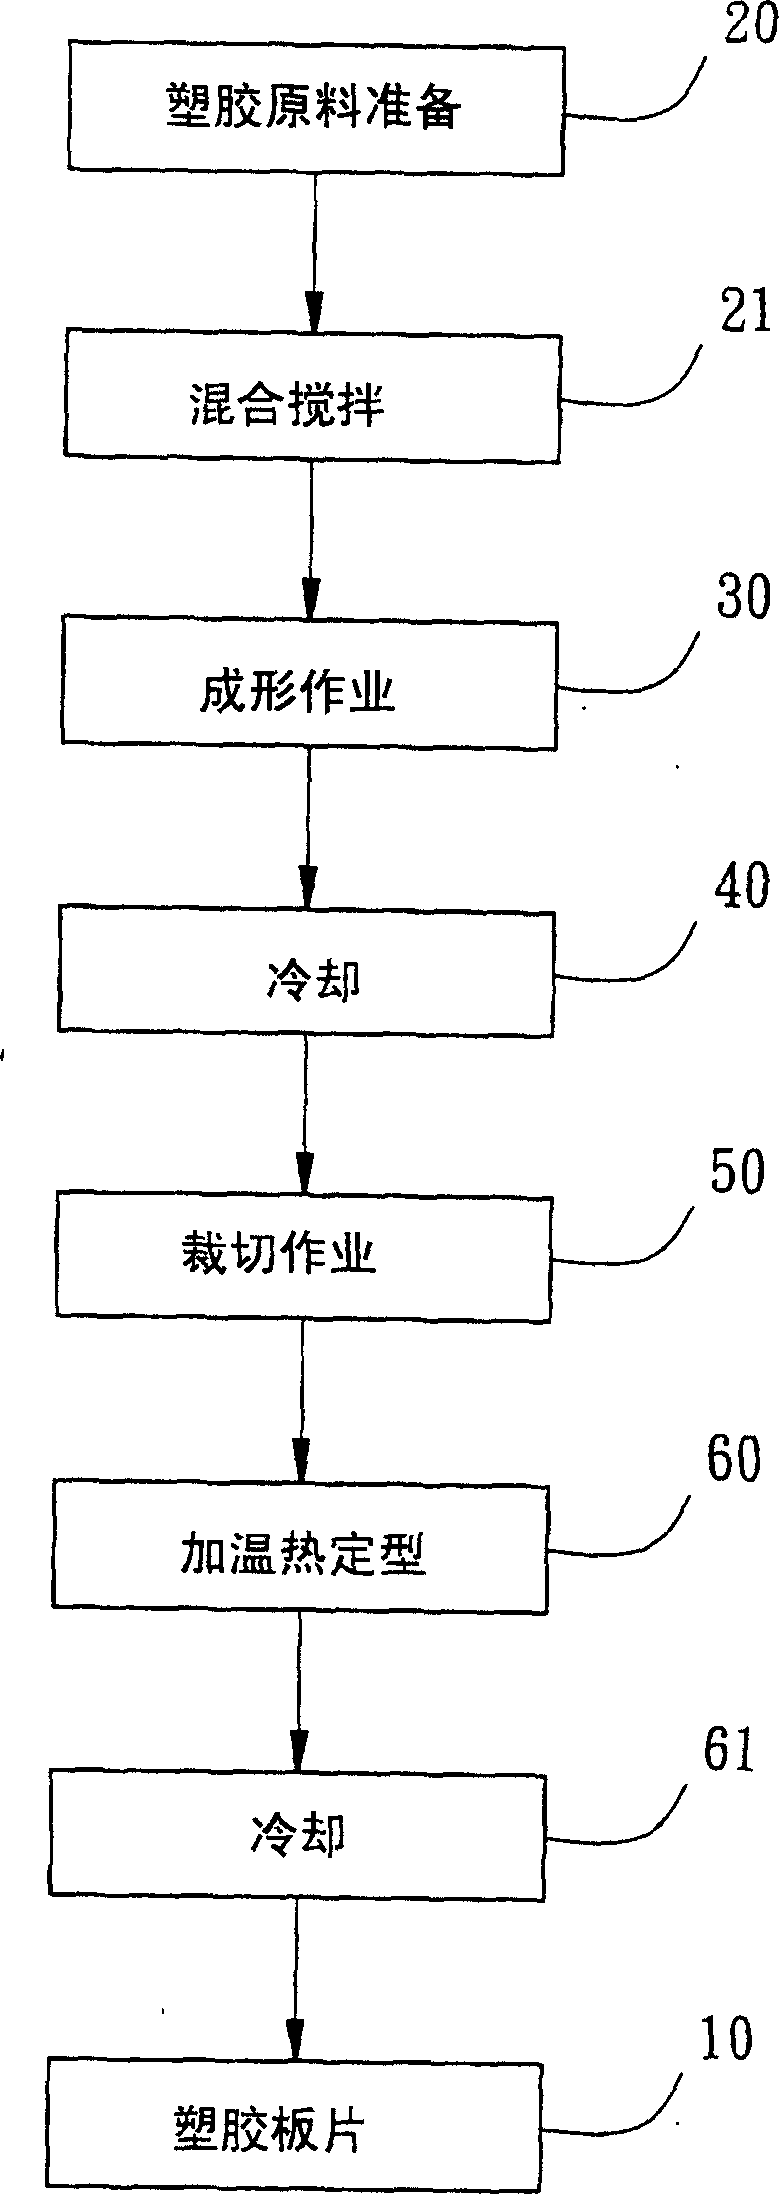 Plastic rubber sheet forming and shaping processing method